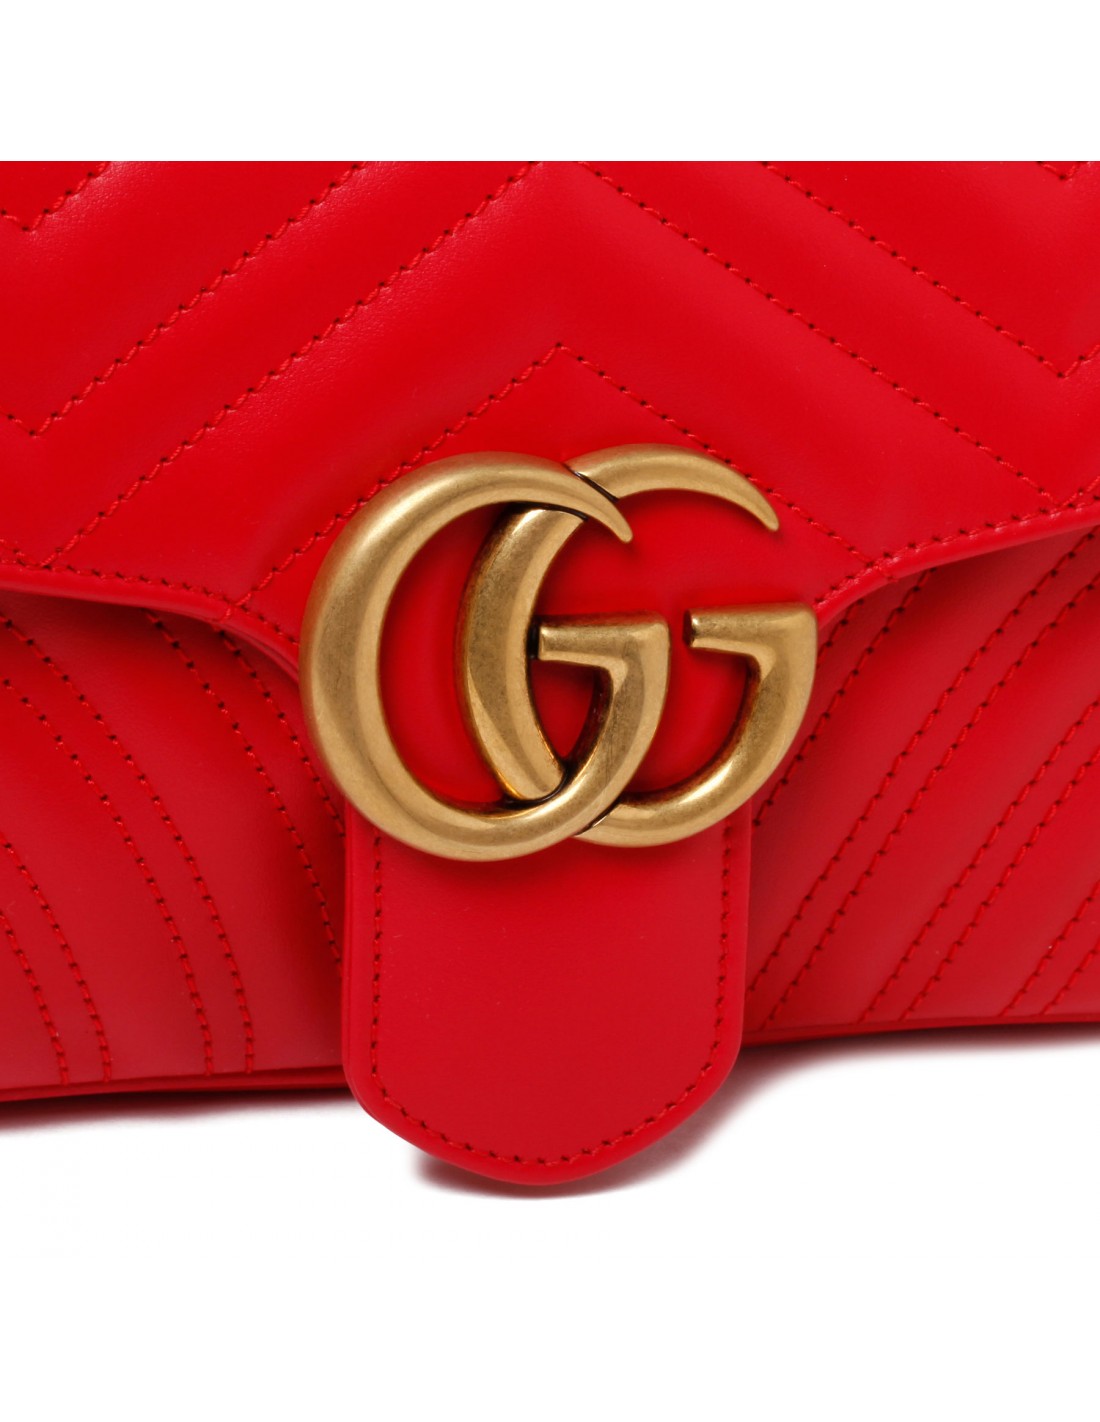 GG Marmont red small shoulder bag